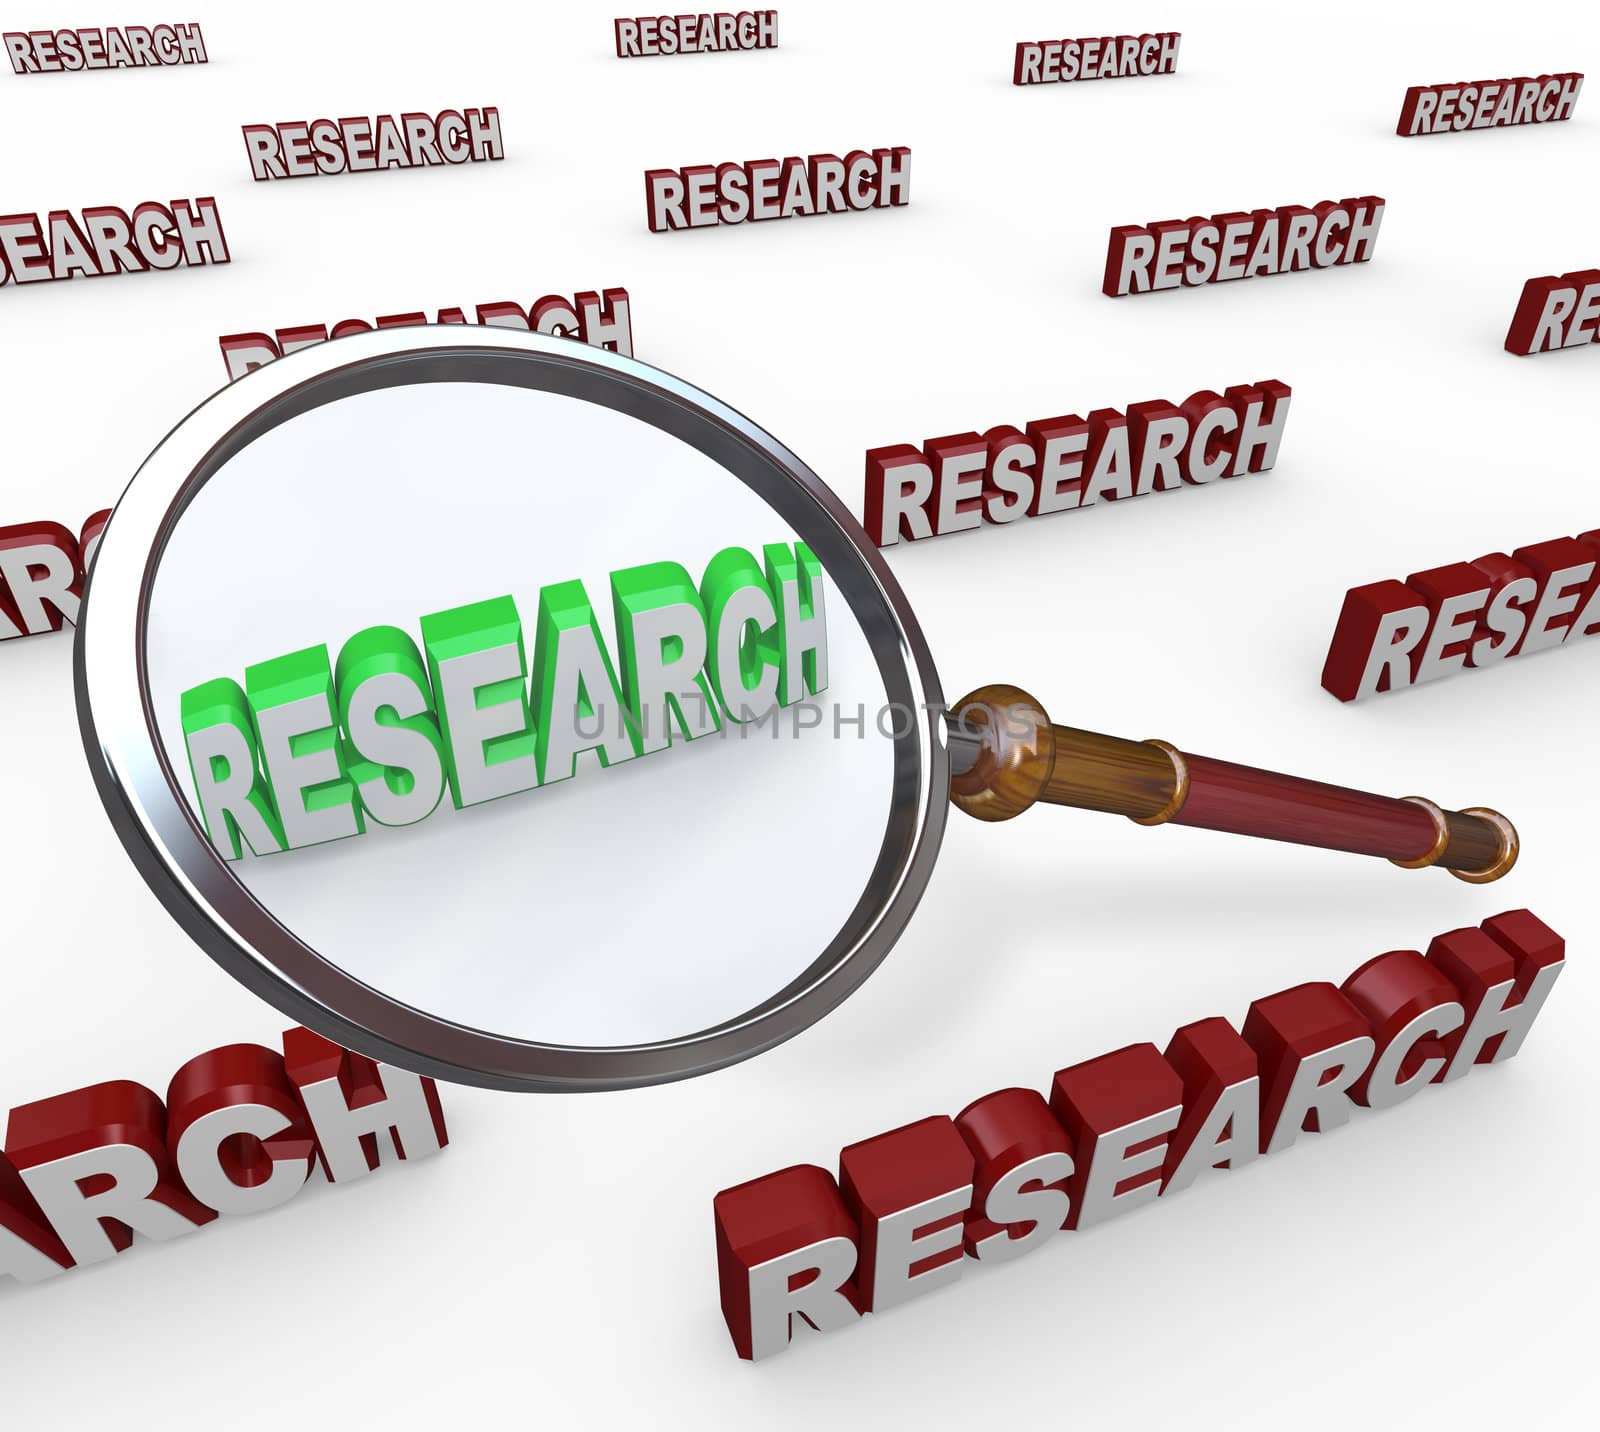 A magnifying glass hovering over the word Research to represent searching for information for your work or school project and gather knowledge